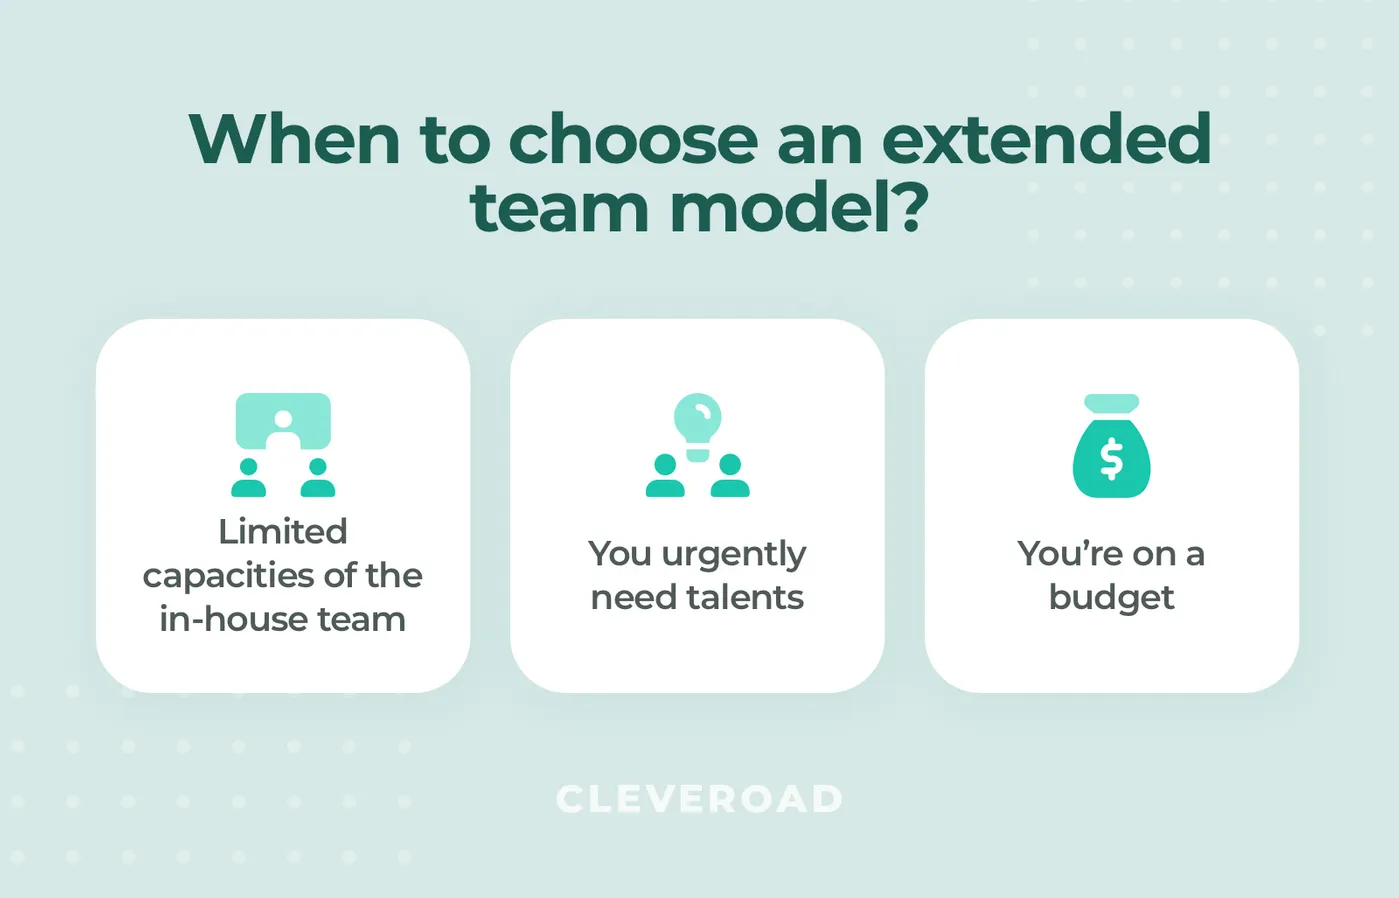 When to choose an extended team?